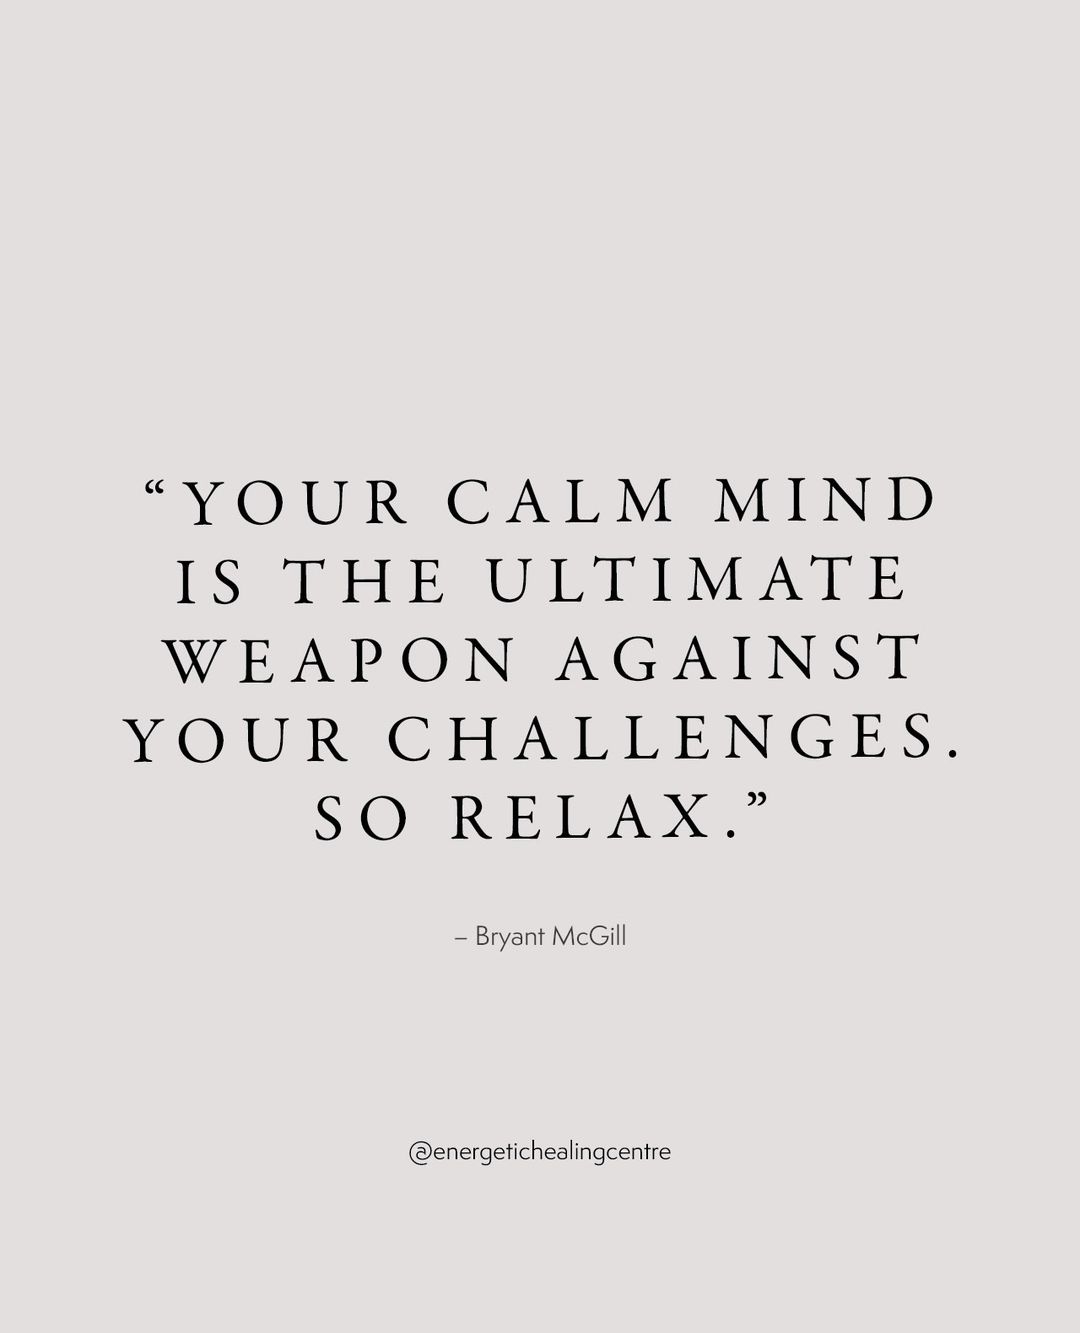 your calm mind is the ultimate weapon against your next challenge... so relax.